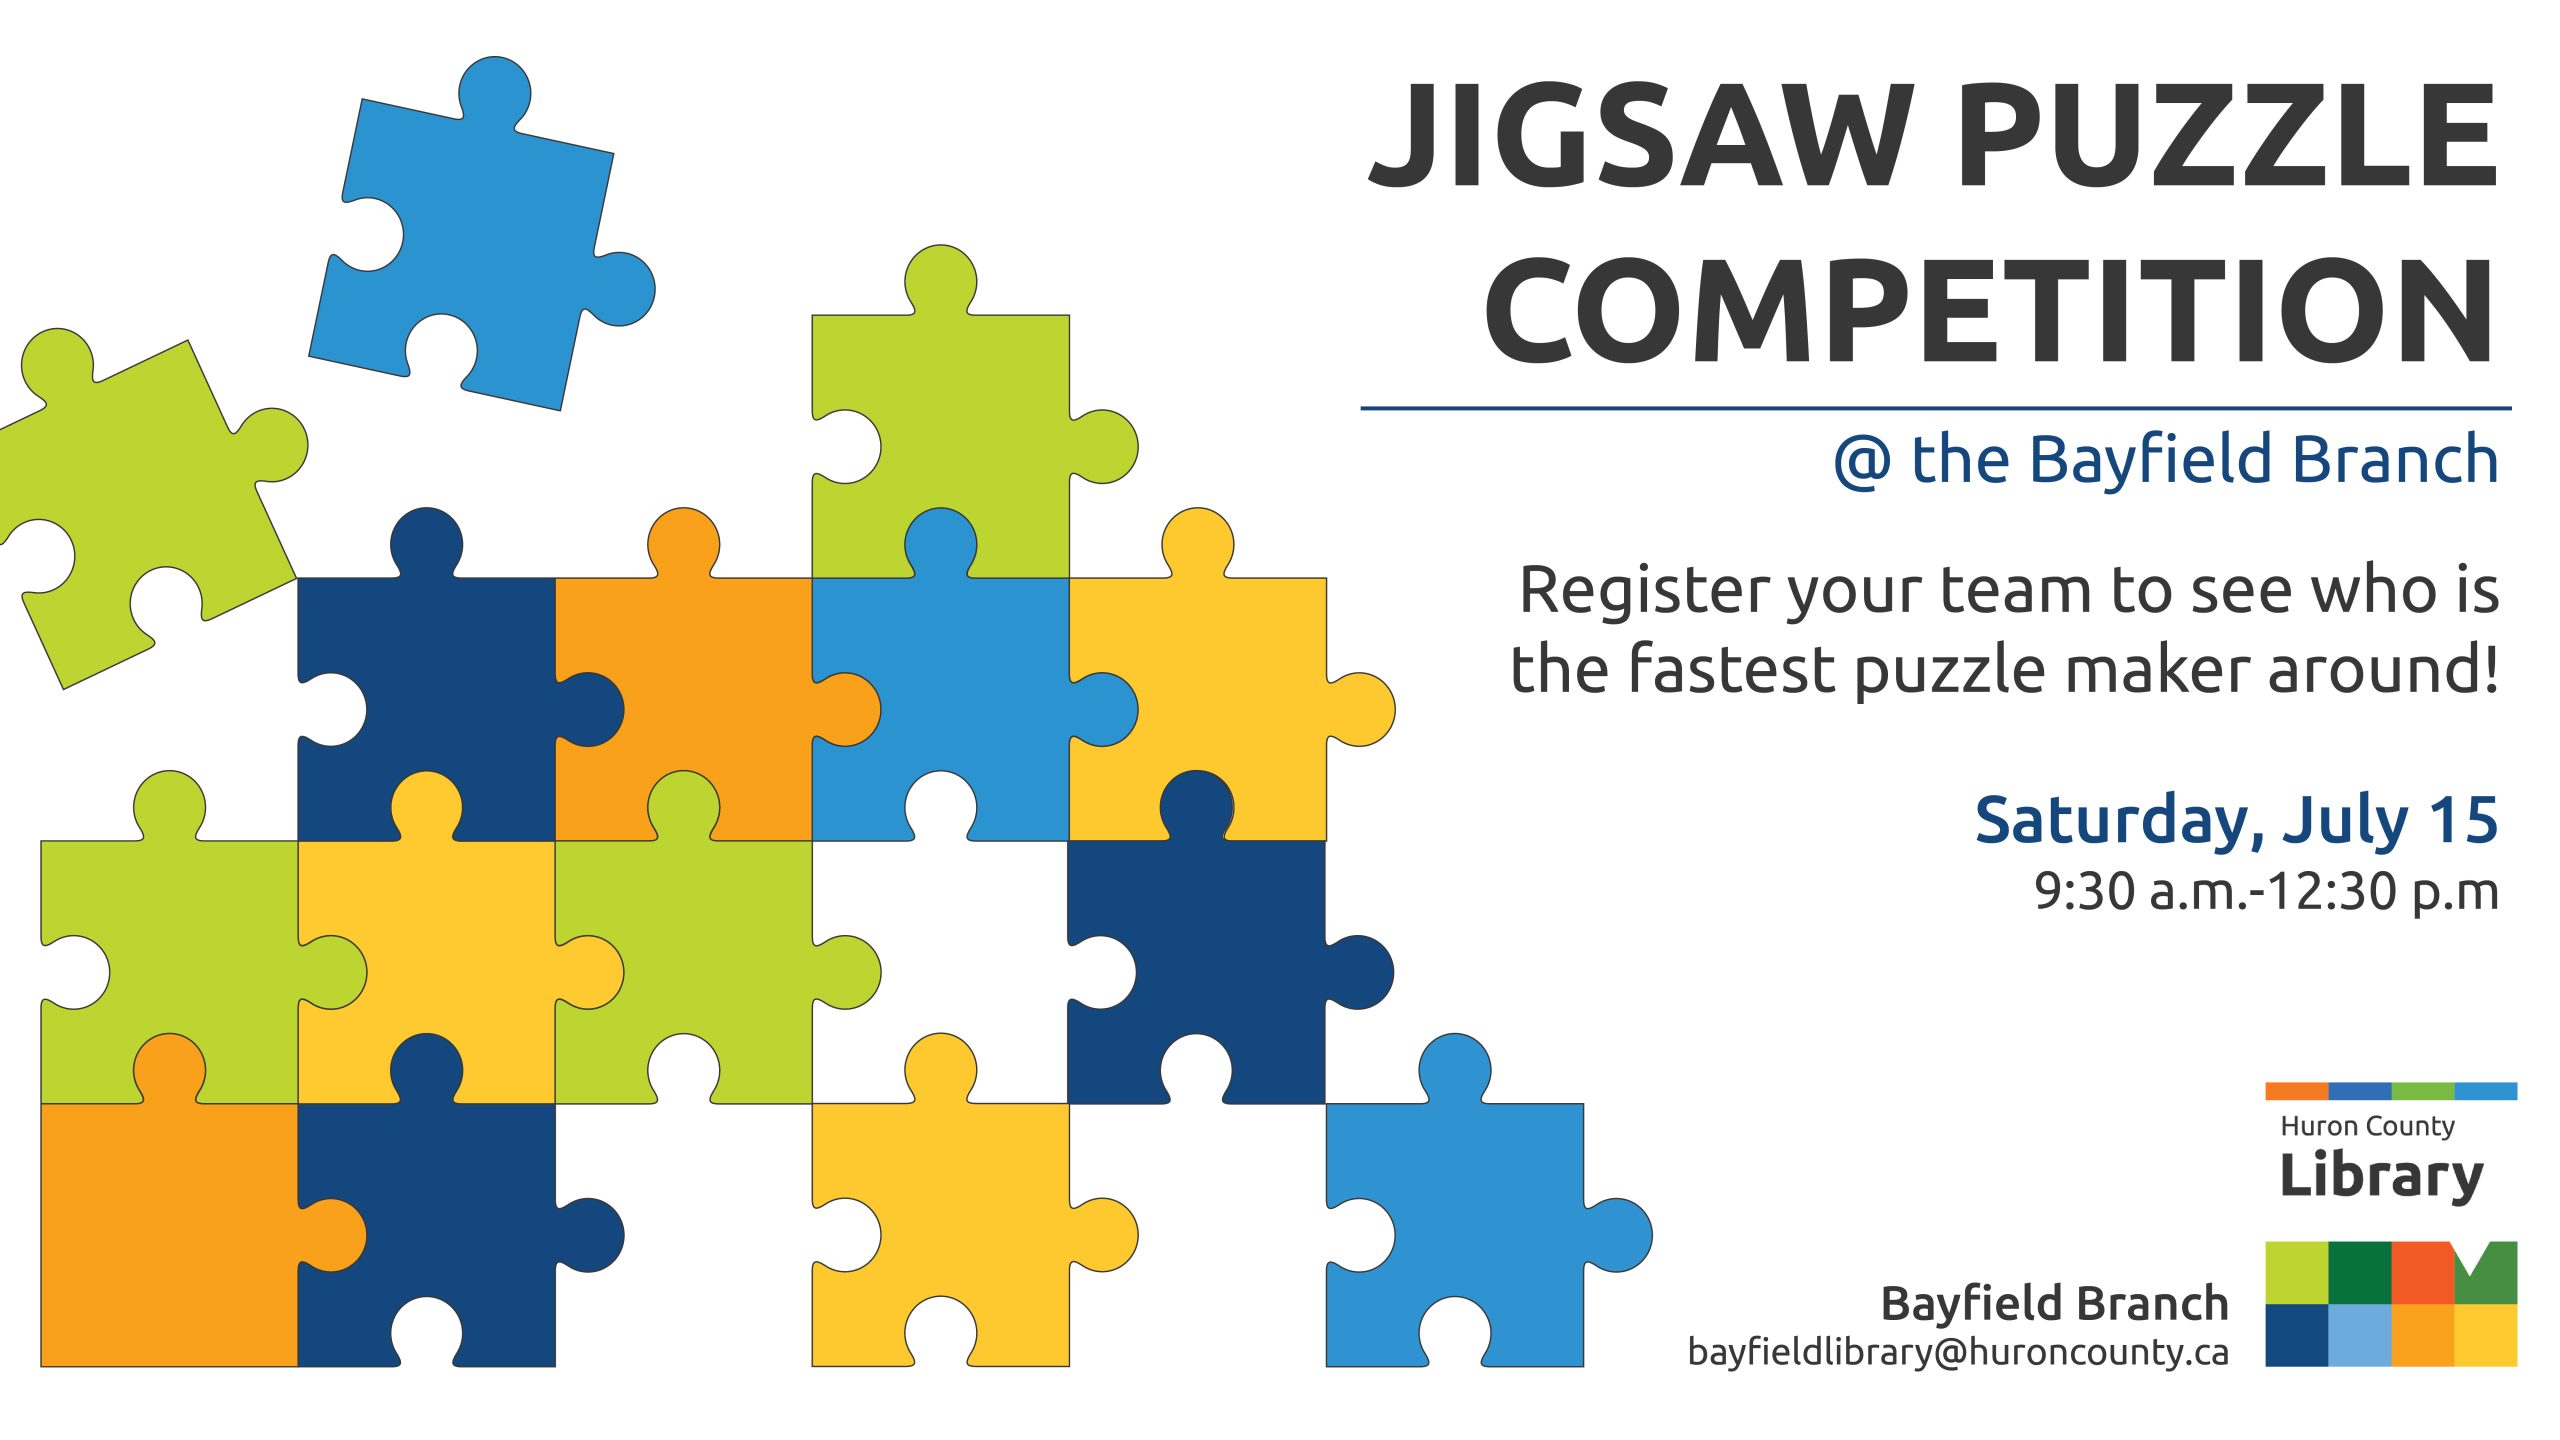 Illustration of puzzle pieces with text promoting Jigsaw Puzzle Competition at Bayfield Branch